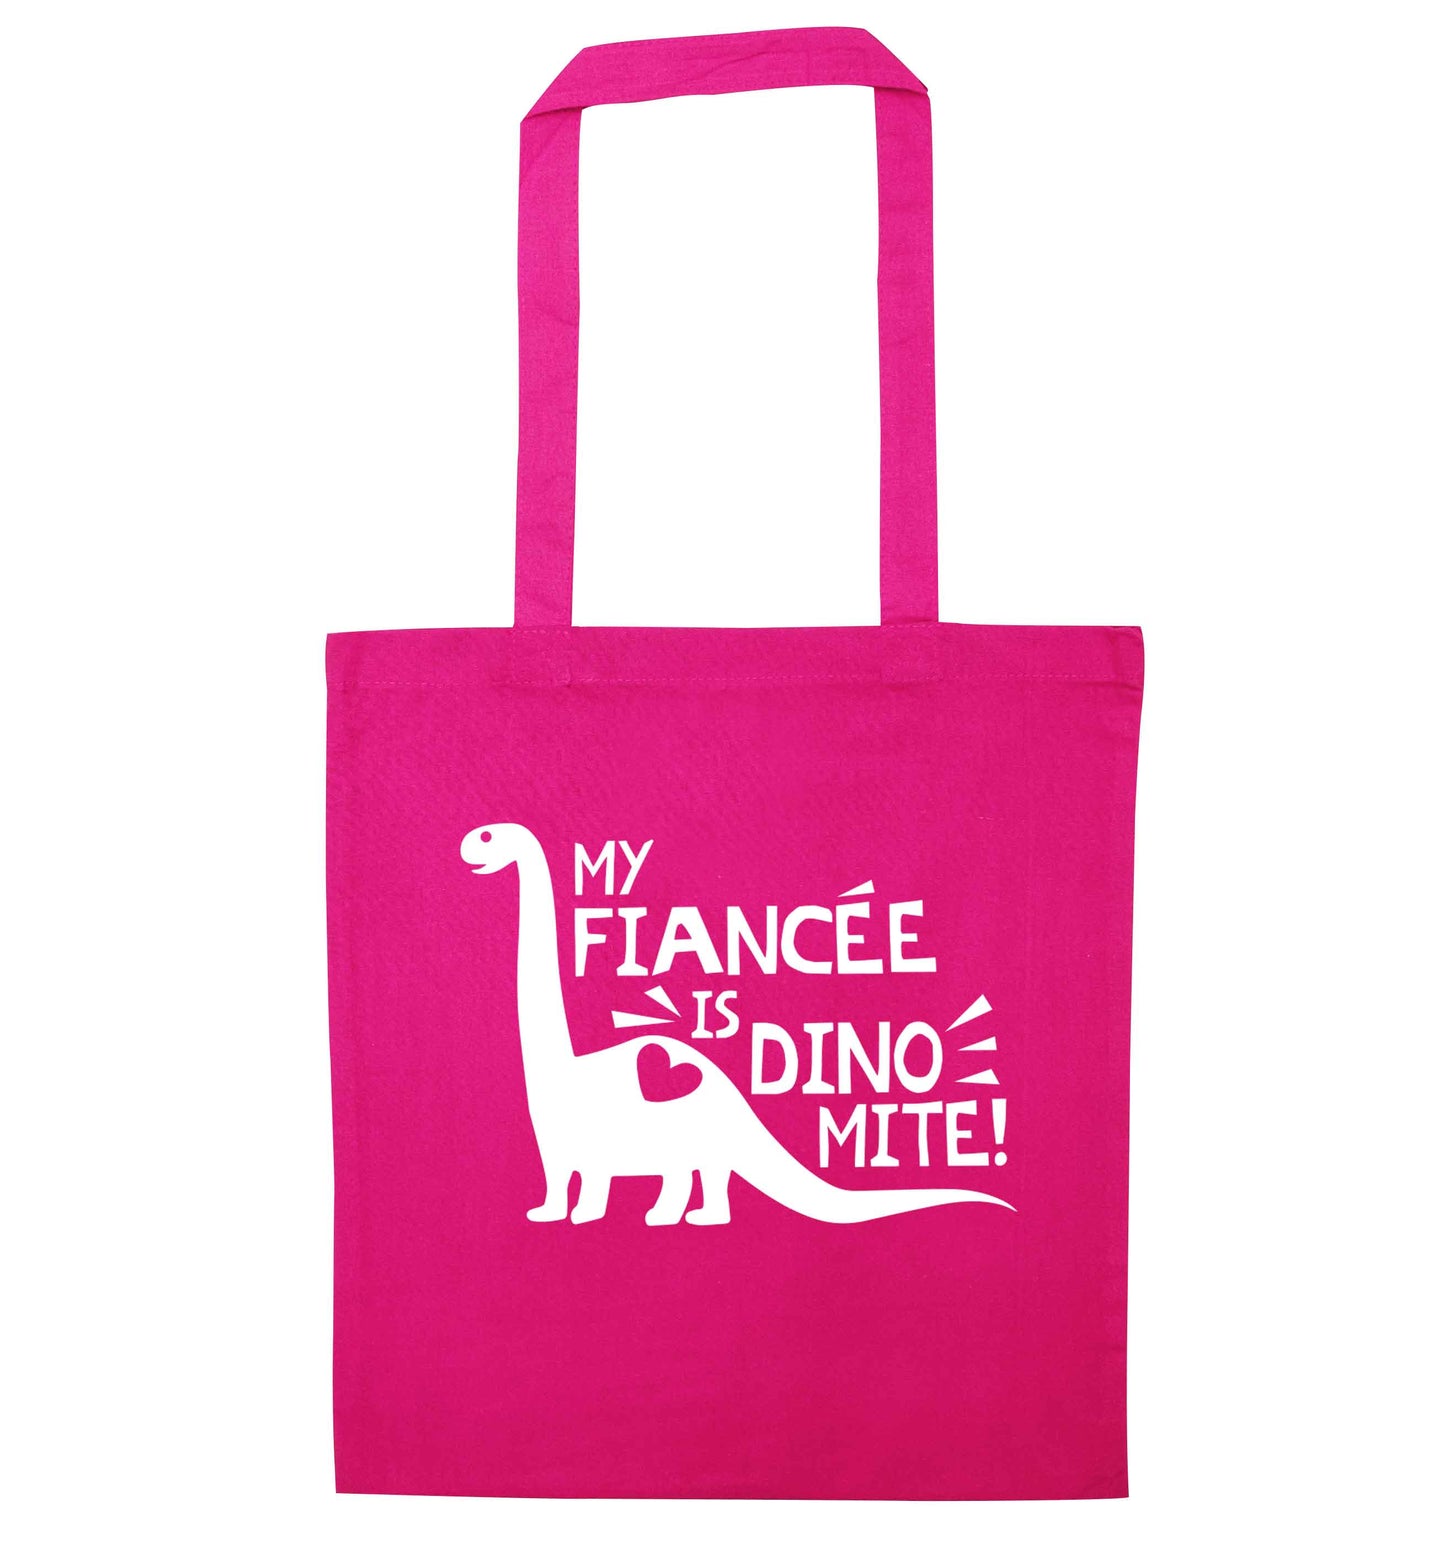 My fiancee is dinomite! pink tote bag